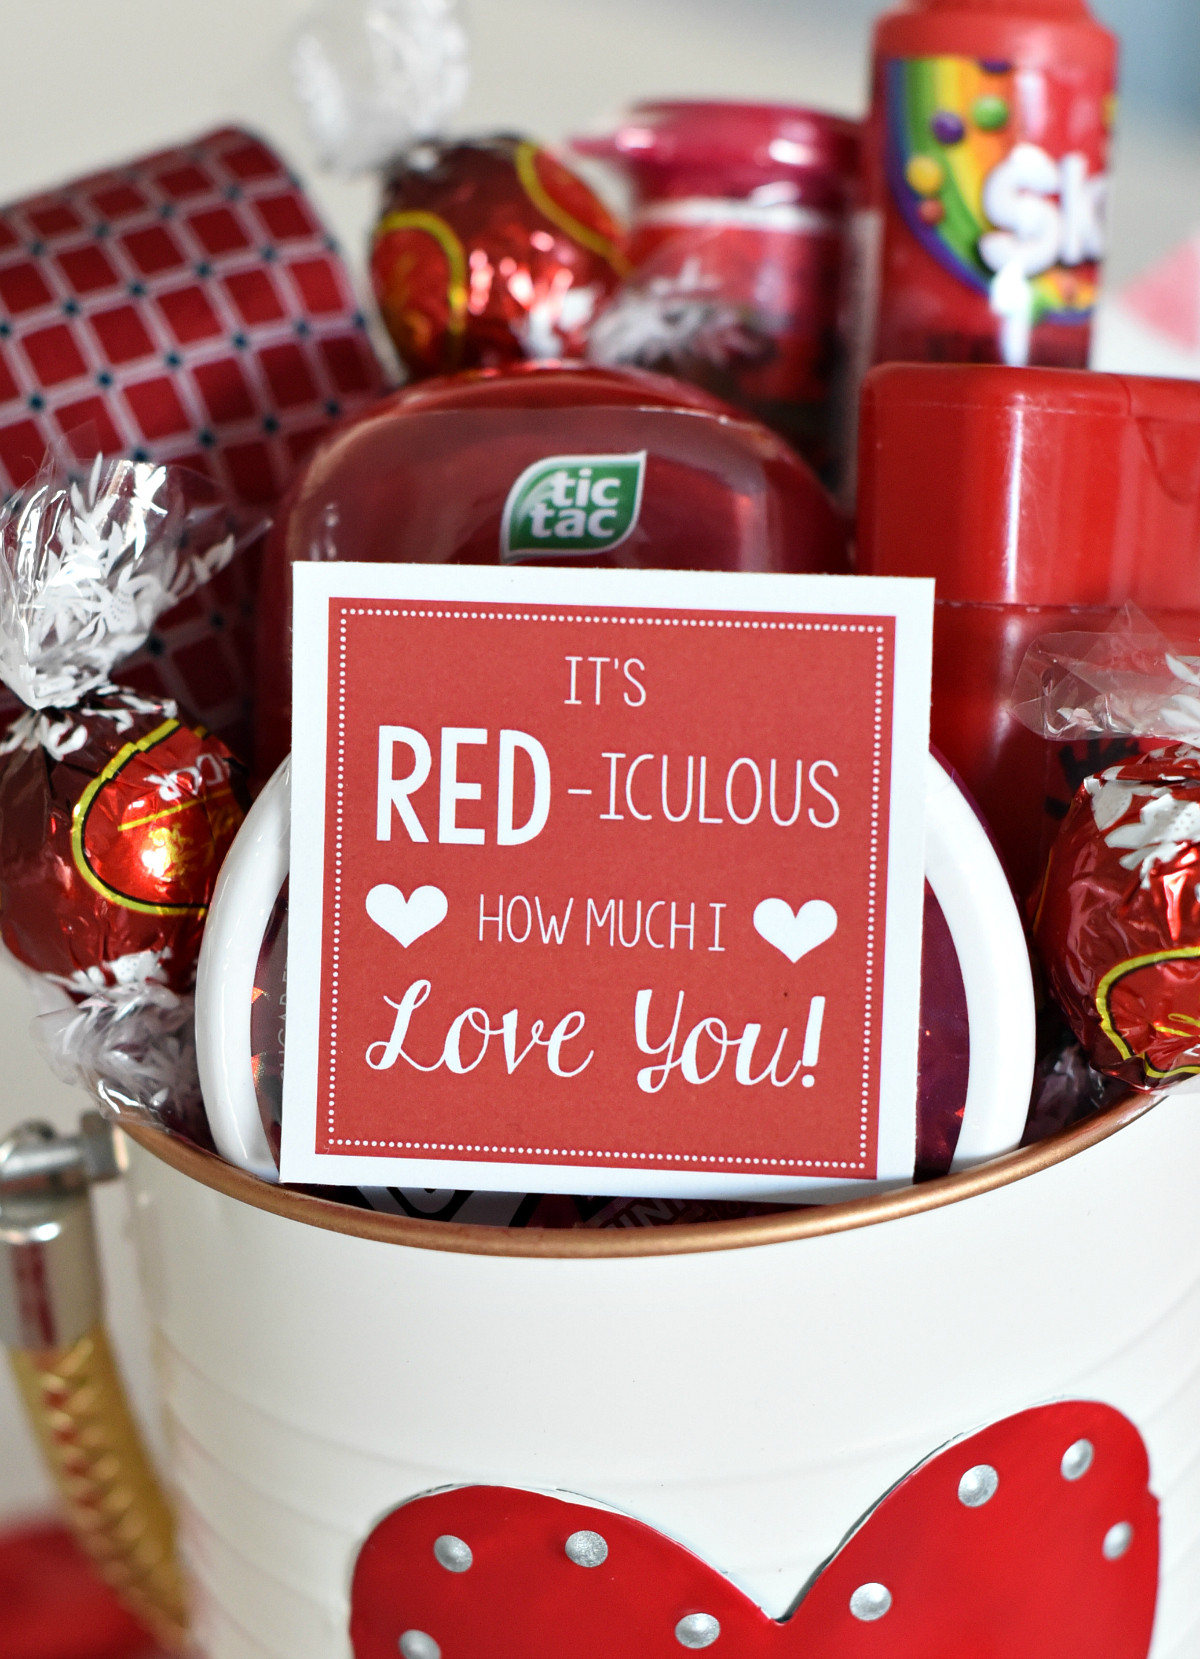 Pinterest Valentines Gift Ideas
 Cute Valentine s Day Gift Idea RED iculous Basket